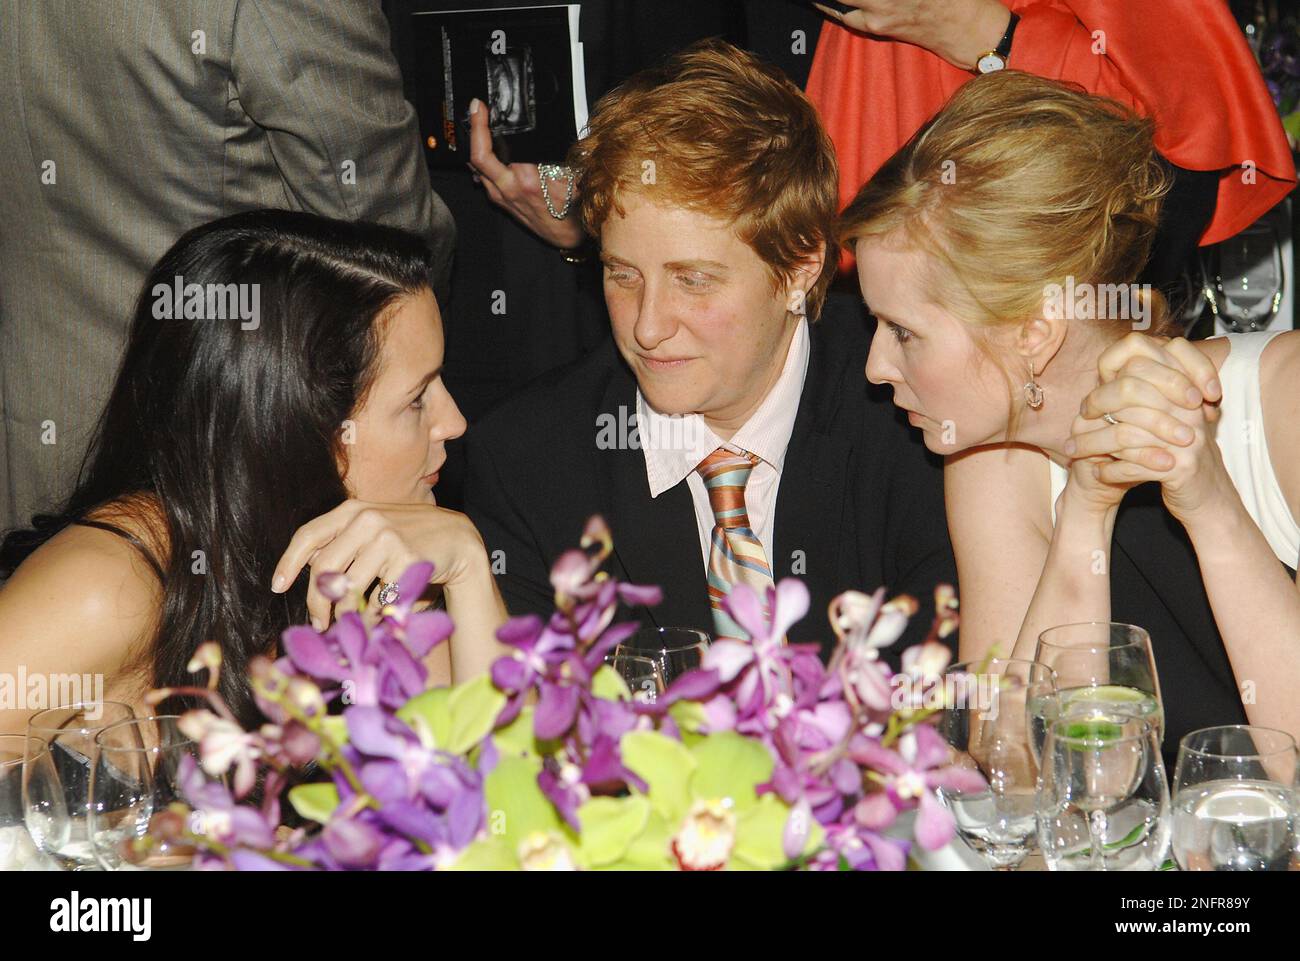 From left, actress Kristin Davis, Christine Marinoni and actress Cynthia Nixon attend the Point Foundation Honors benefit dinner at Capitale, Monday, April 7, 2008 in New York. (AP Photo/Evan Agostini) Stock Photo